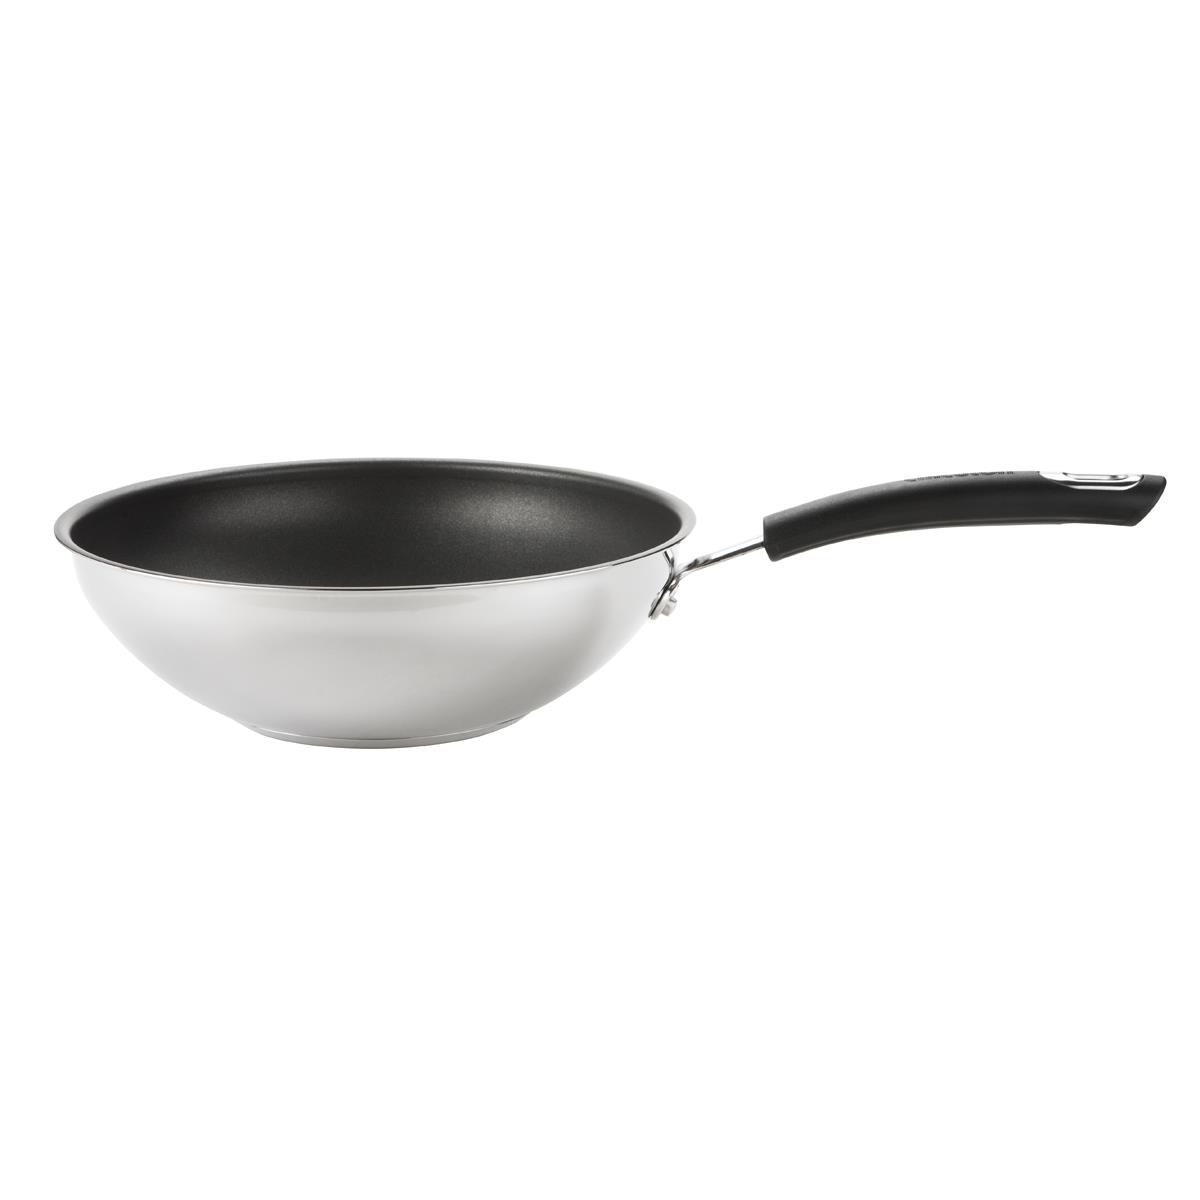 Circulon Total Stainless Steel Stir Fry Wok Questions & Answers